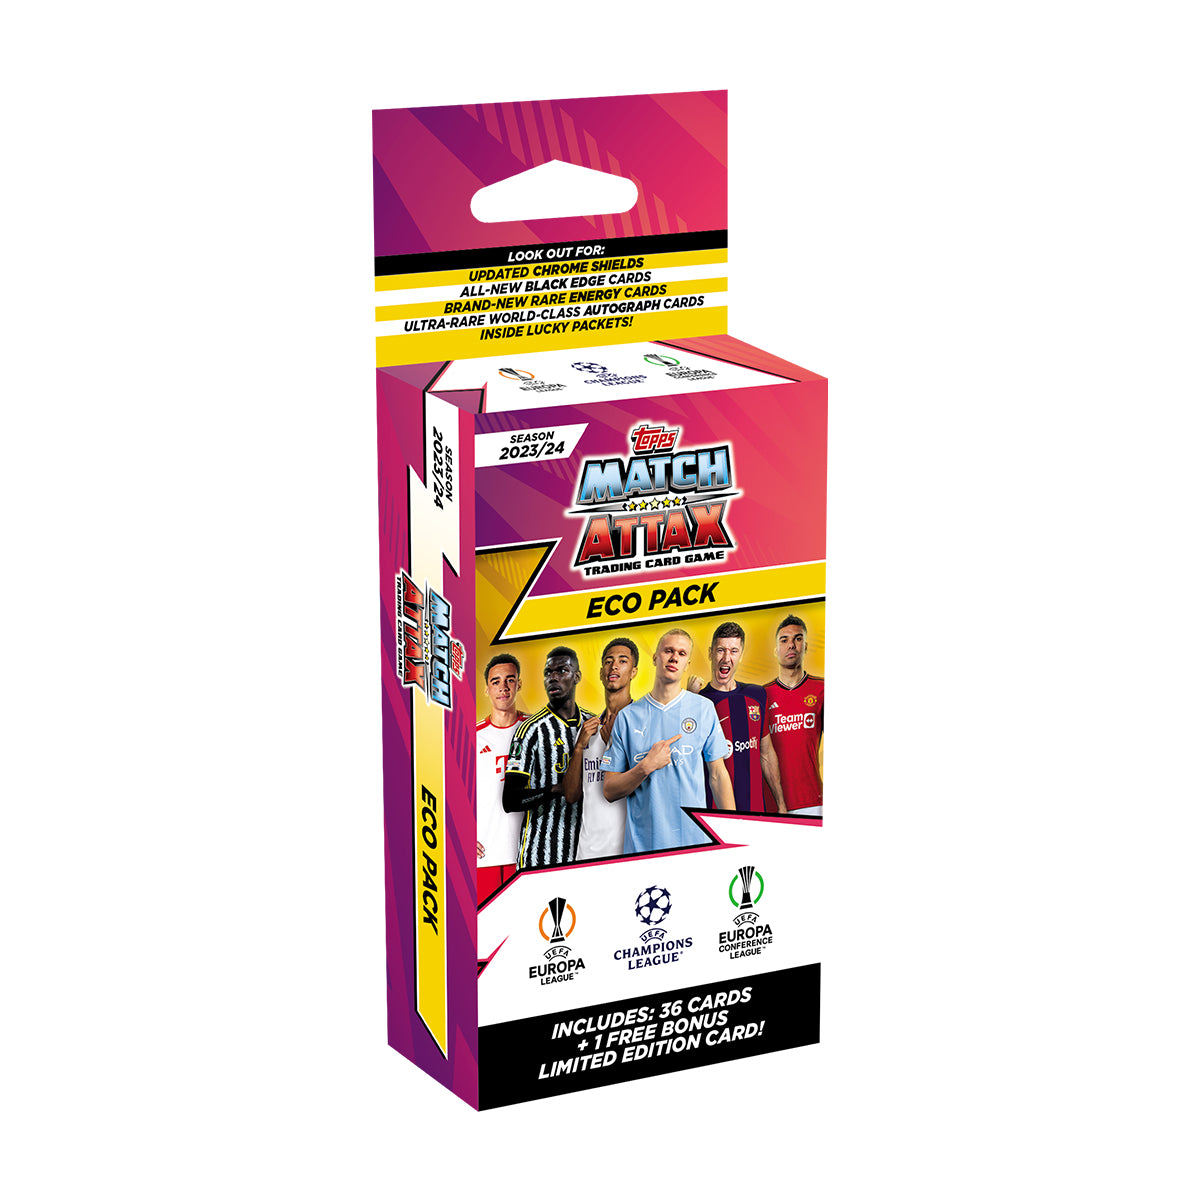 2023-24 TOPPS MATCH ATTAX UEFA CHAMPIONS LEAGUE CARDS - ECO BLASTER (48 CARDS + 3 LE) (IN STOCK OCT 21)